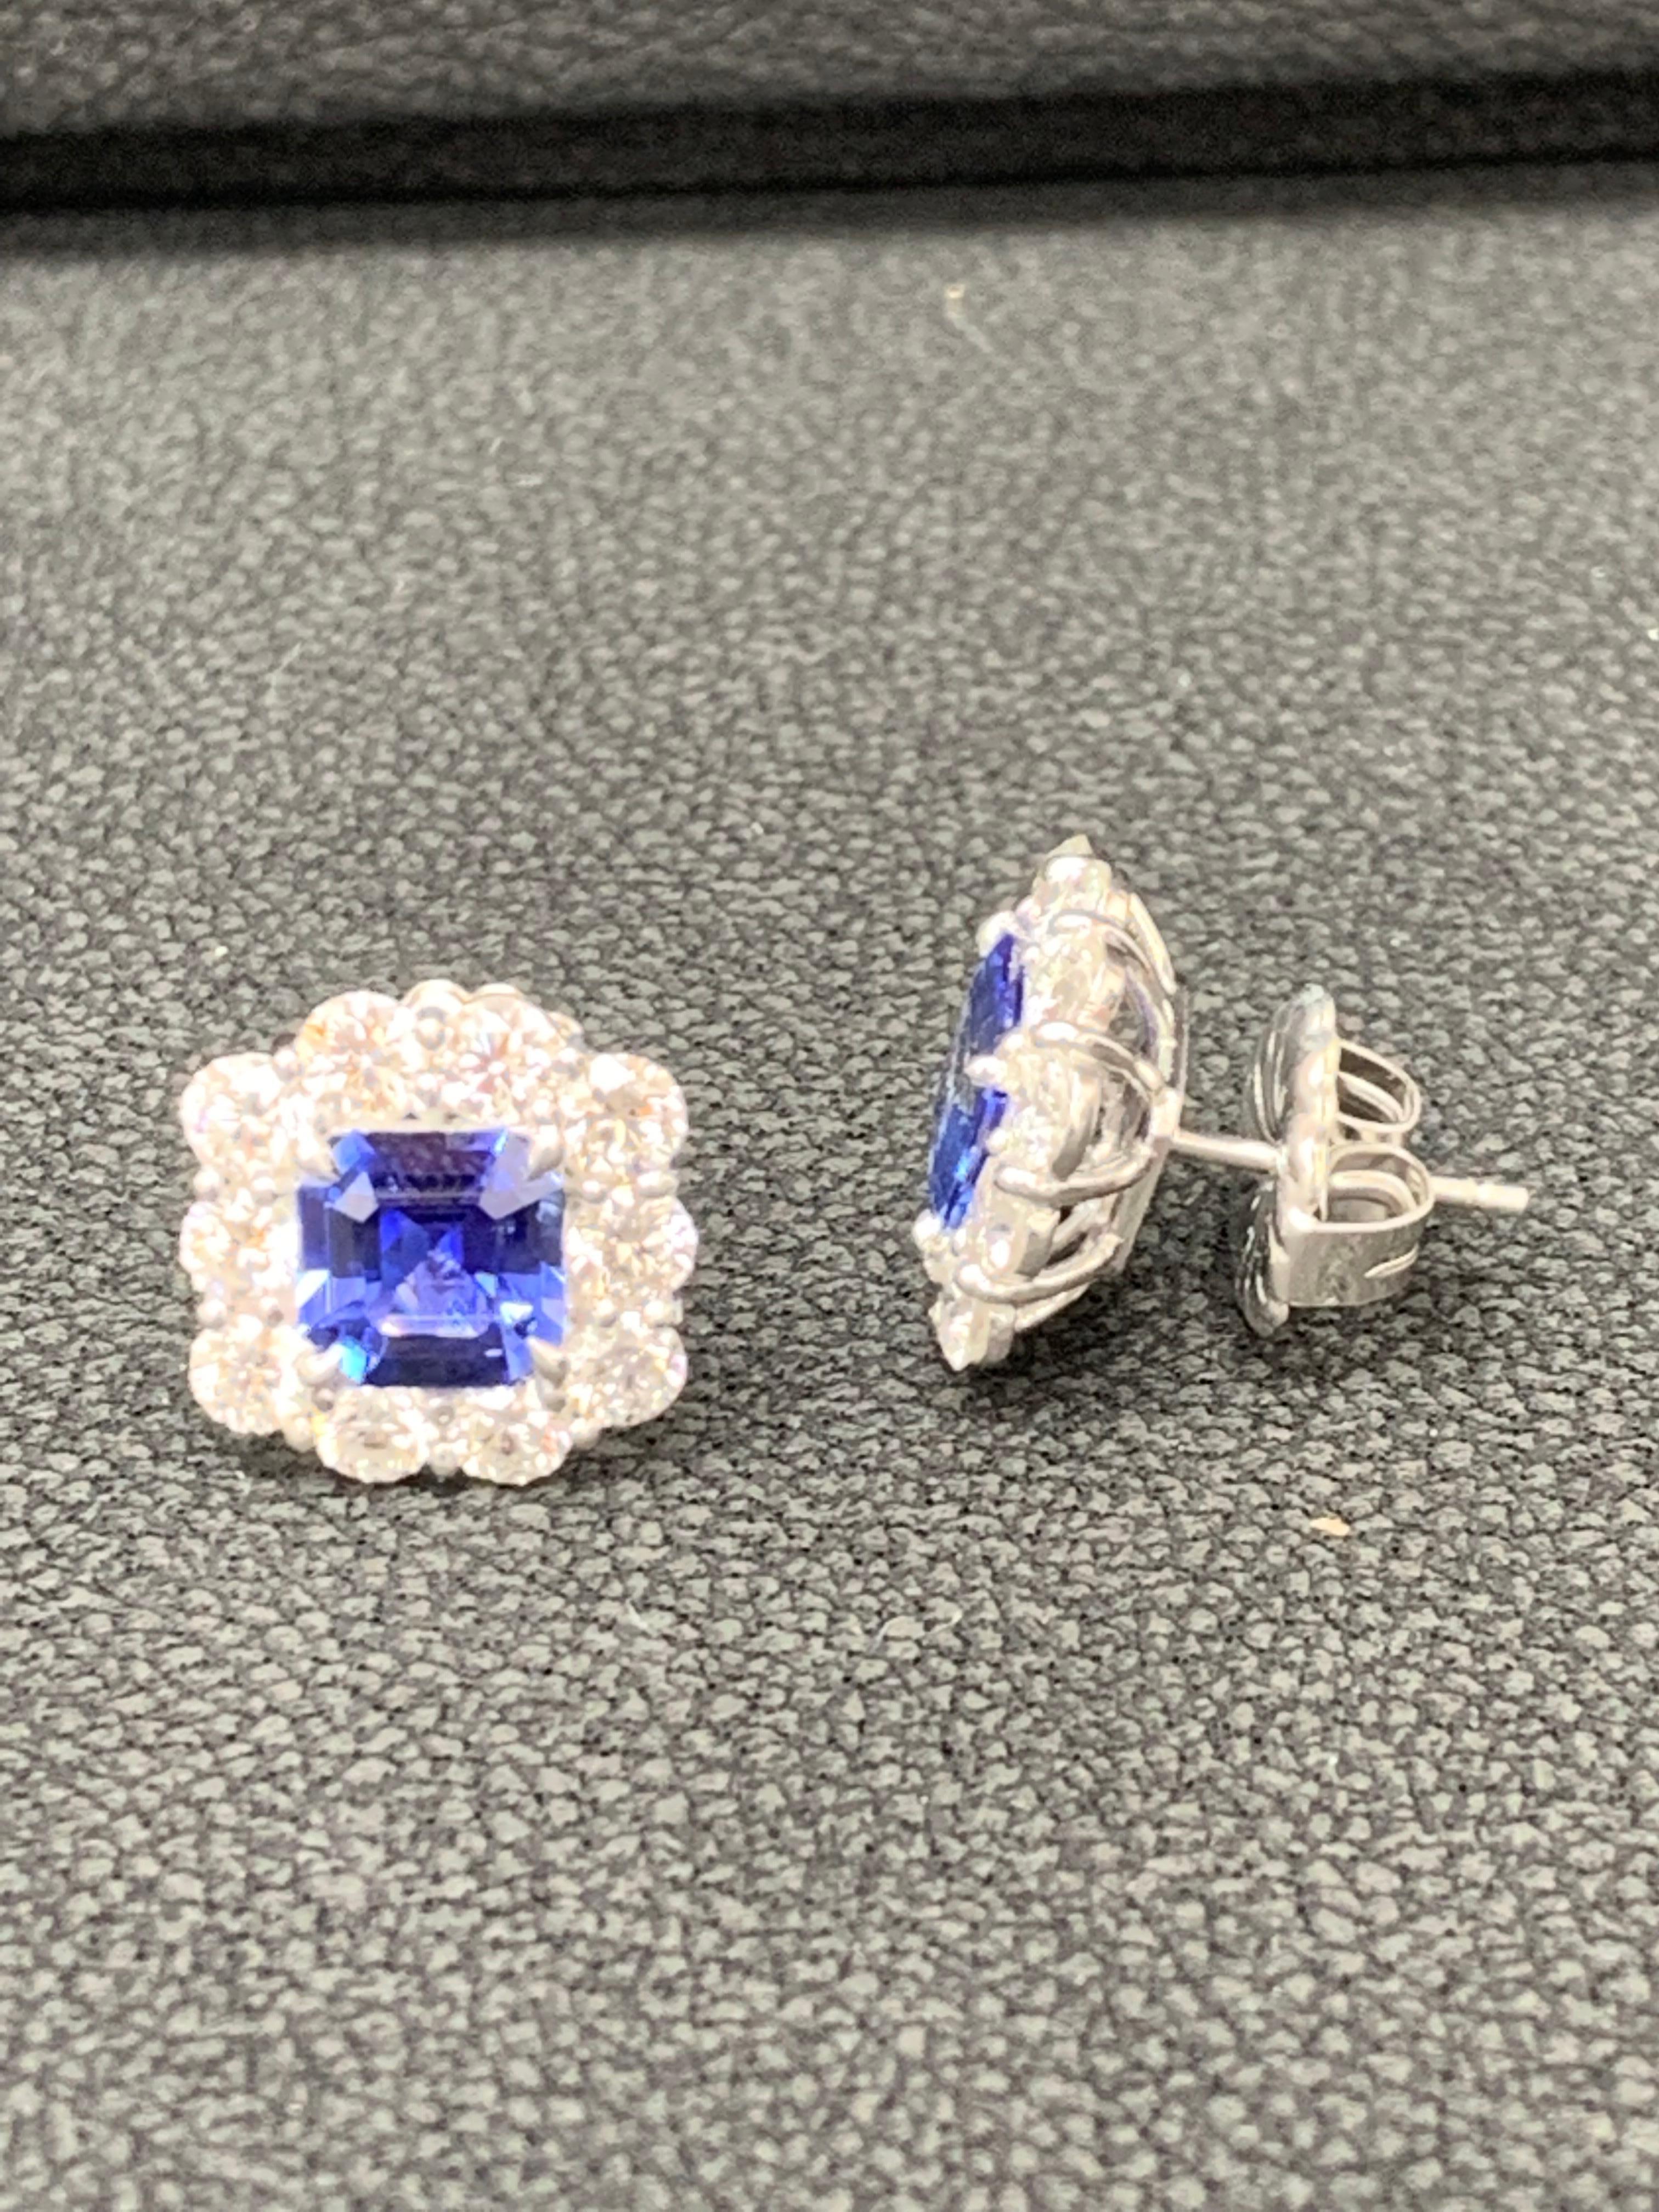 A timeless pair of earrings showcasing two emerald cut blue sapphires weighing 3.20 carats total, accented with a row of 20 round brilliant diamonds weighing 2.63 carats total. Made in 18k white gold. 